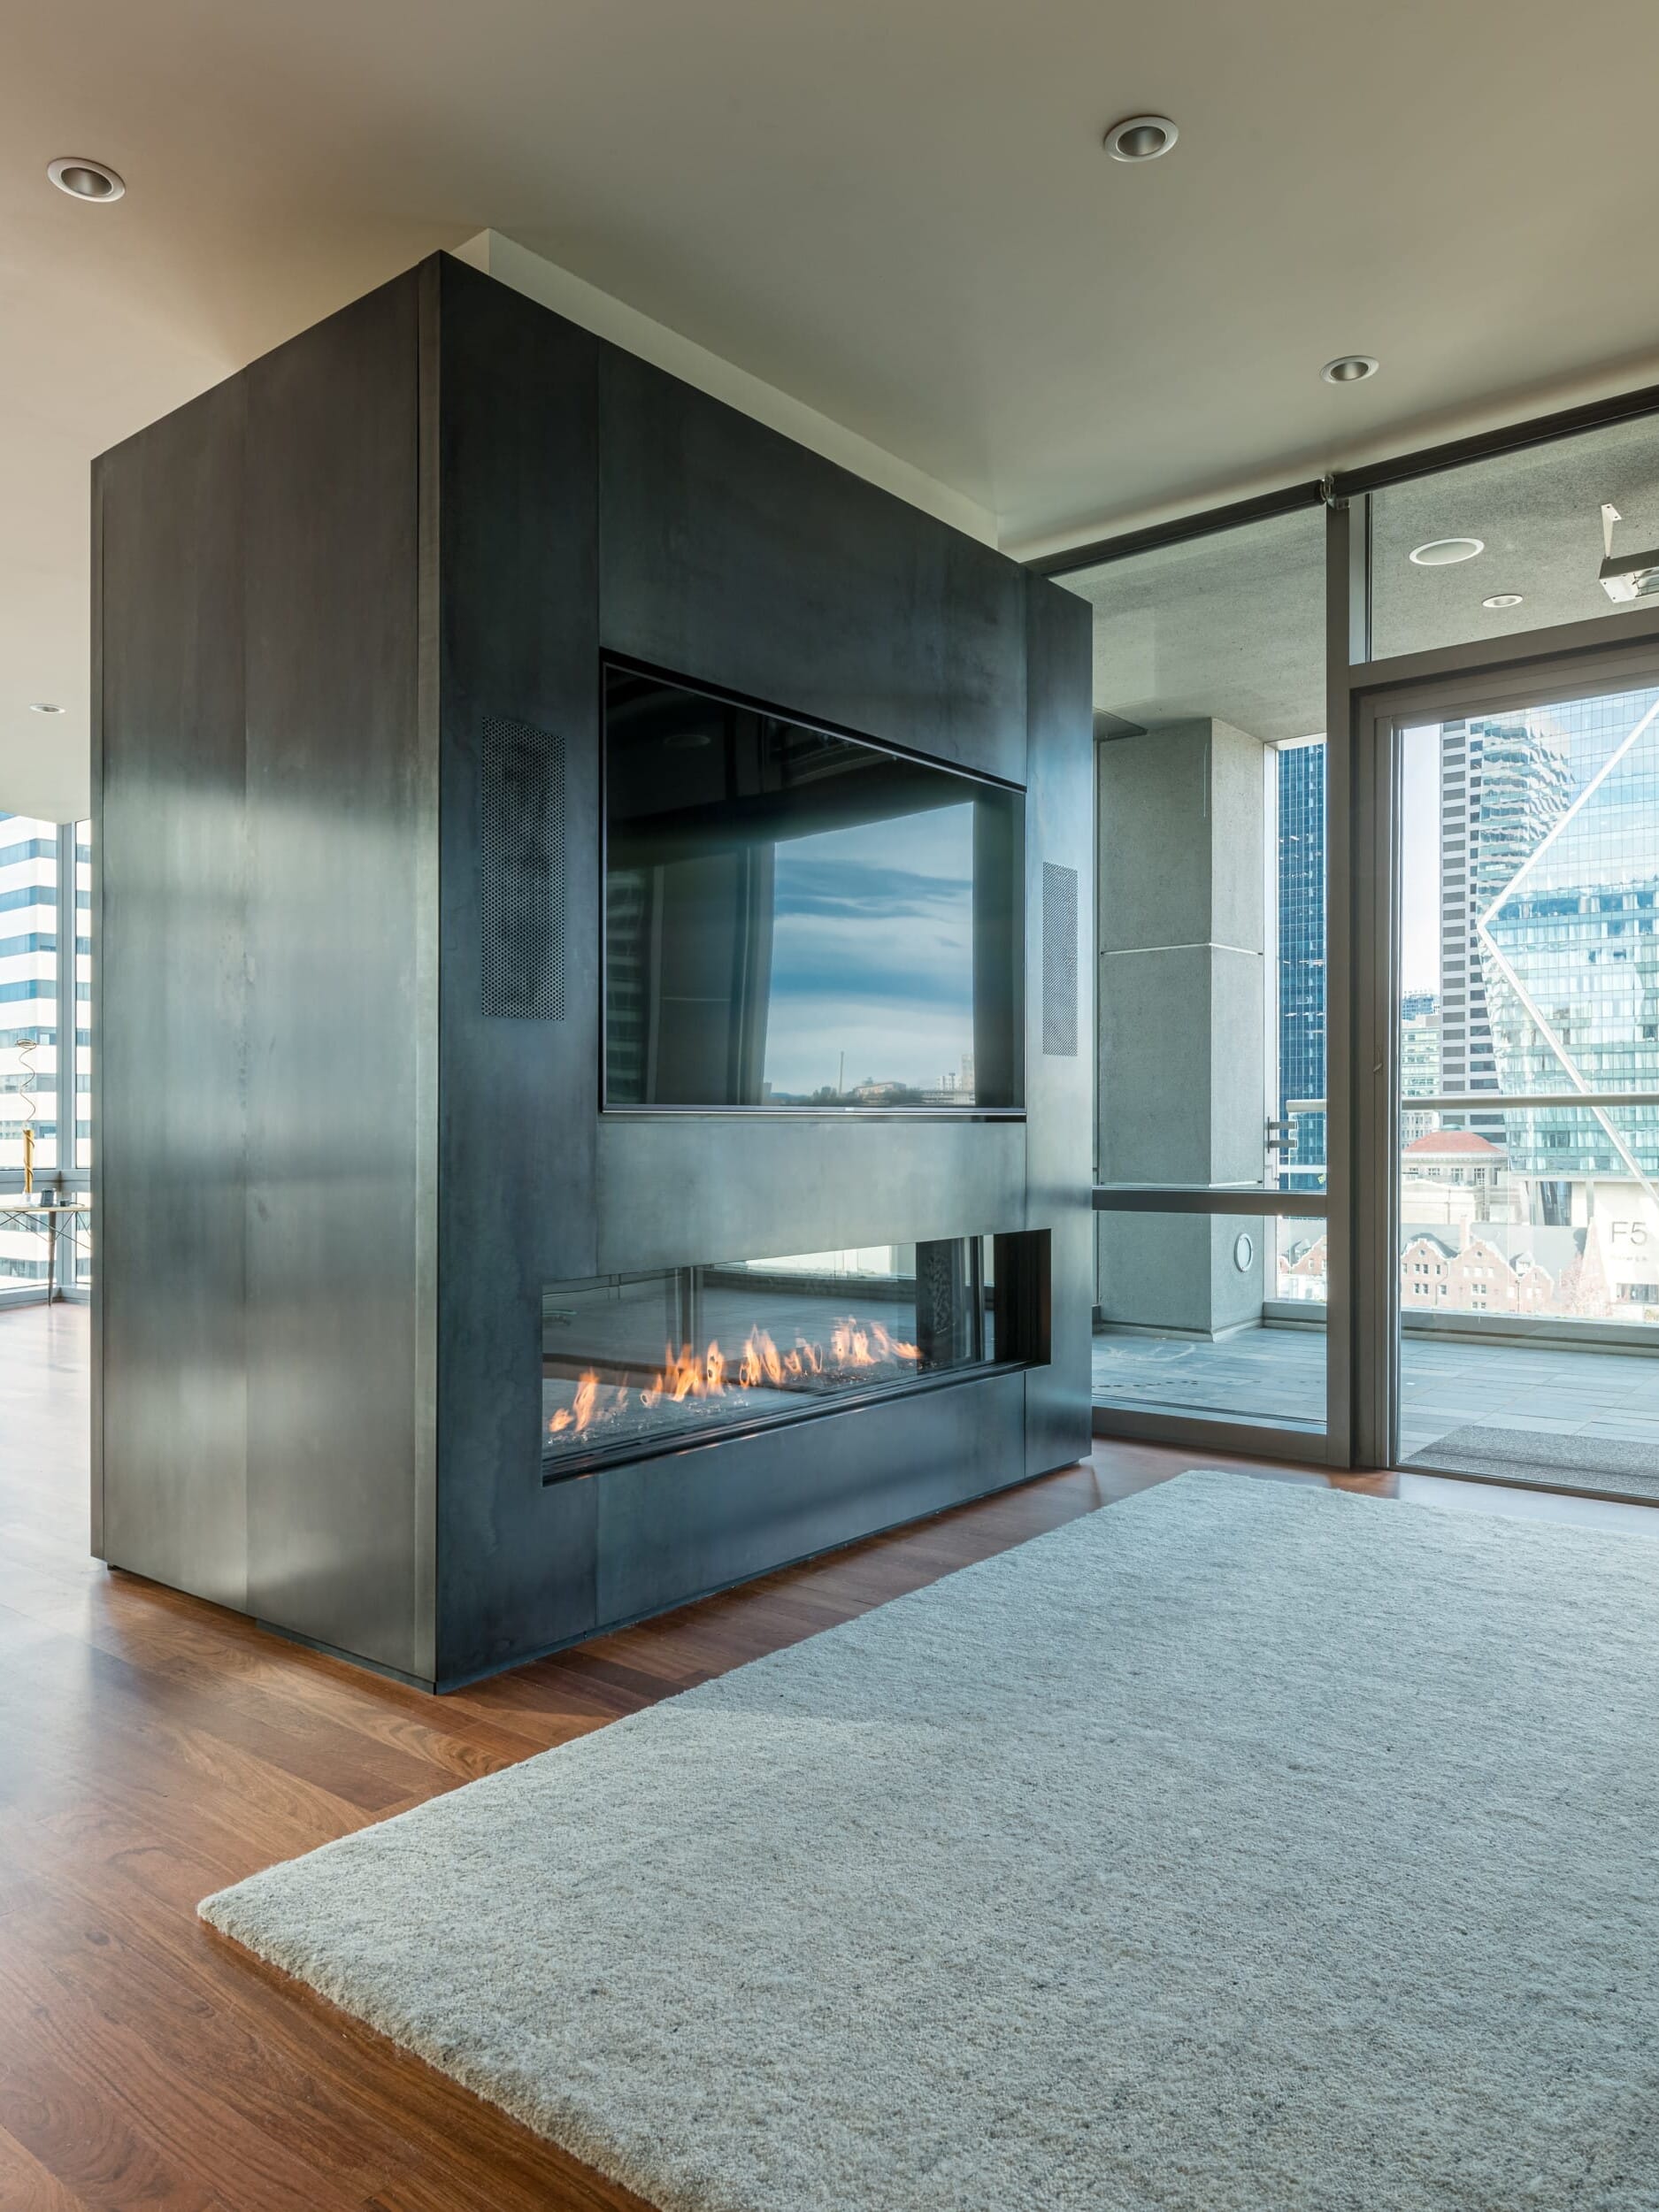 A living room with a fireplace and a view of the city.